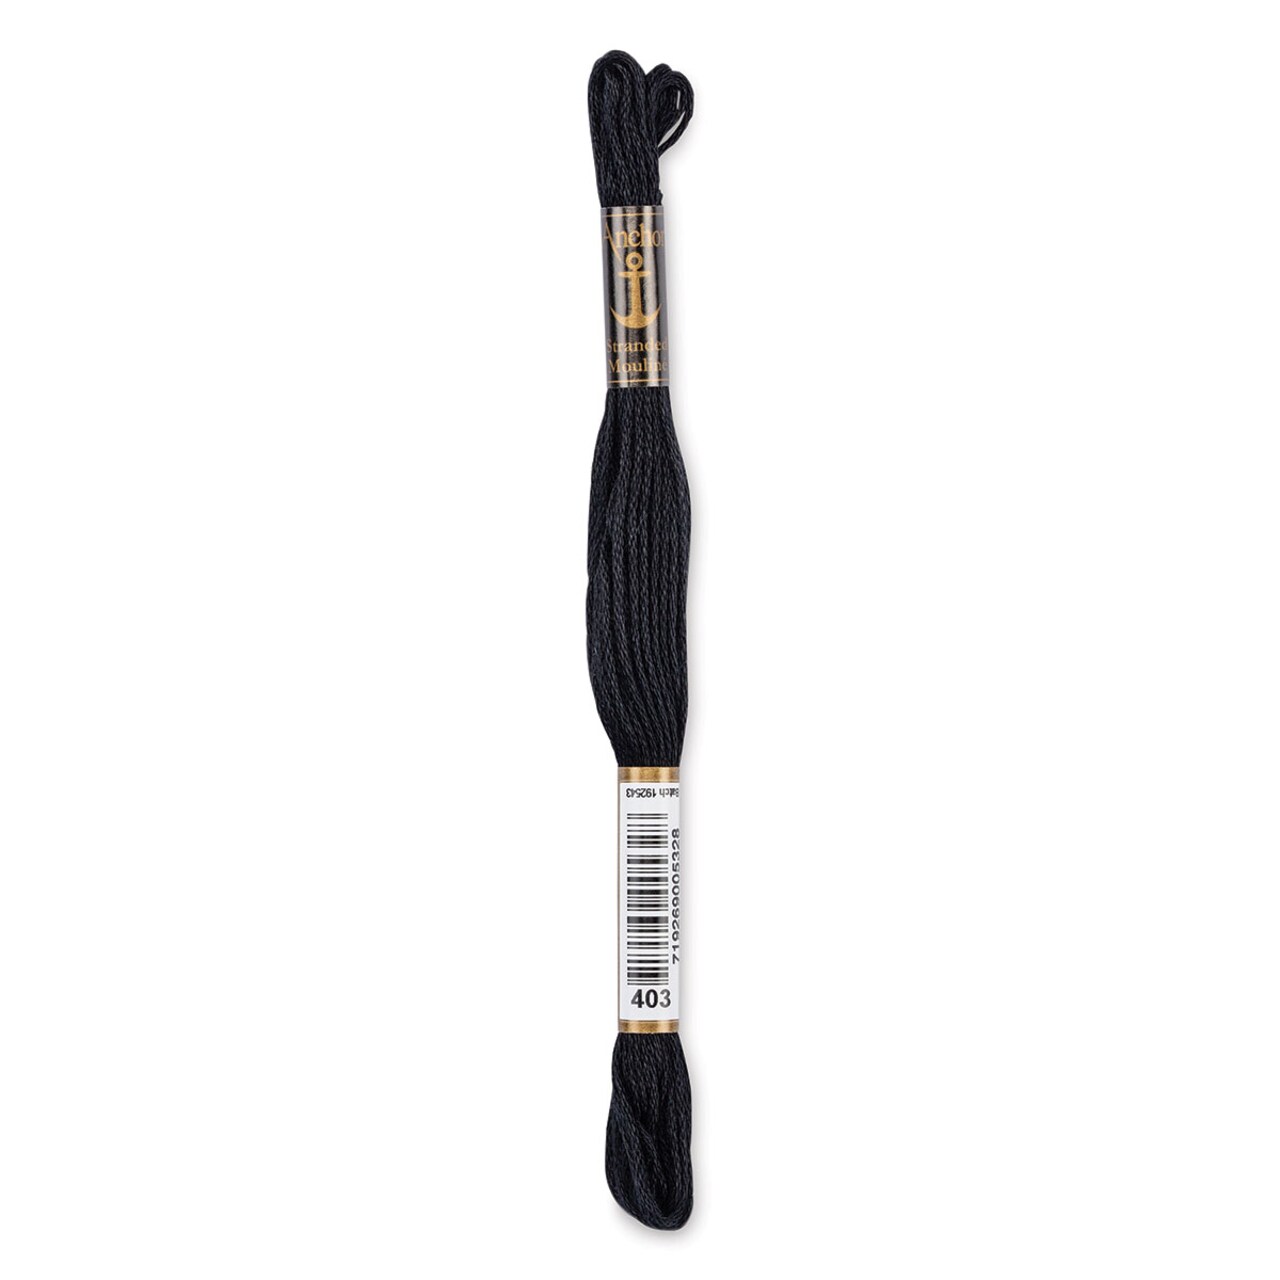 Anchor Embroidery Floss - Pkg of 12, Black 0403